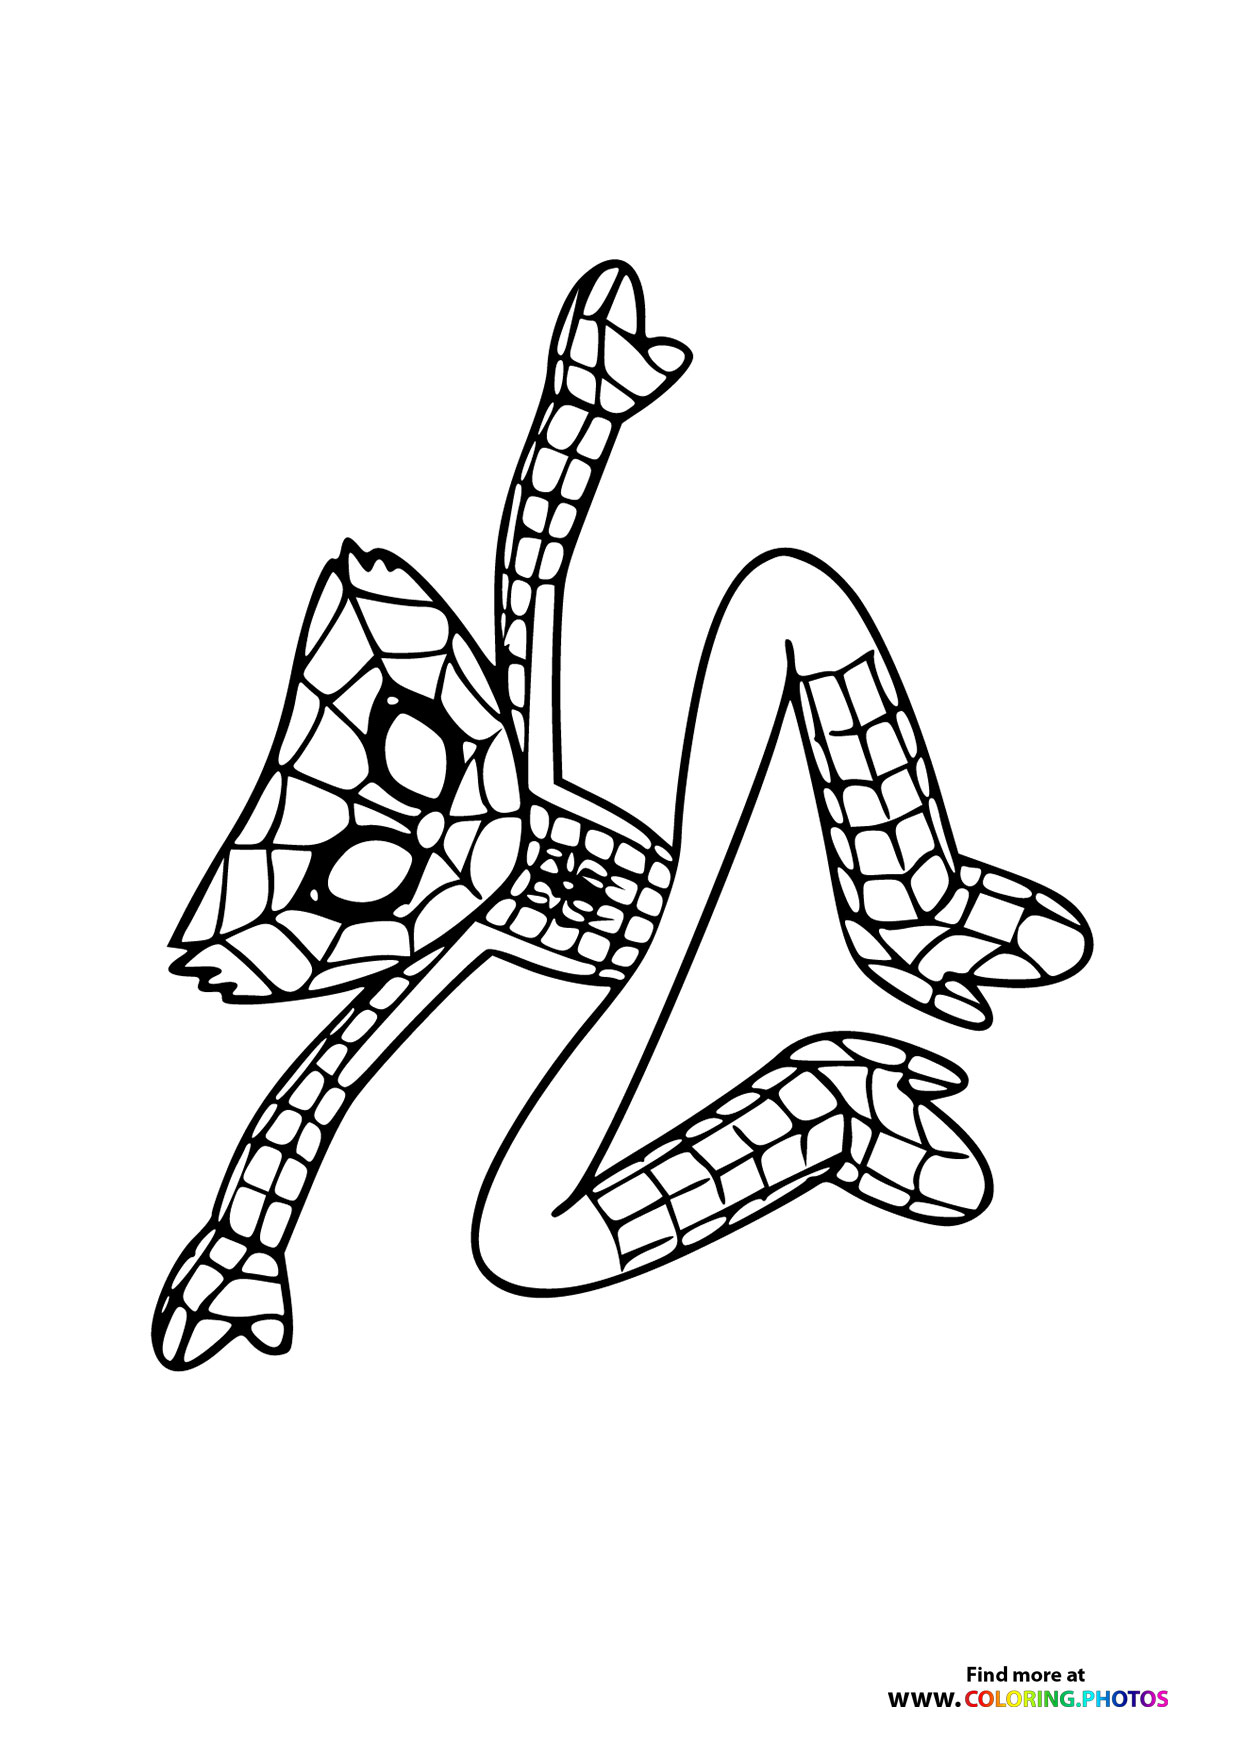 Spider man huggy wuggy